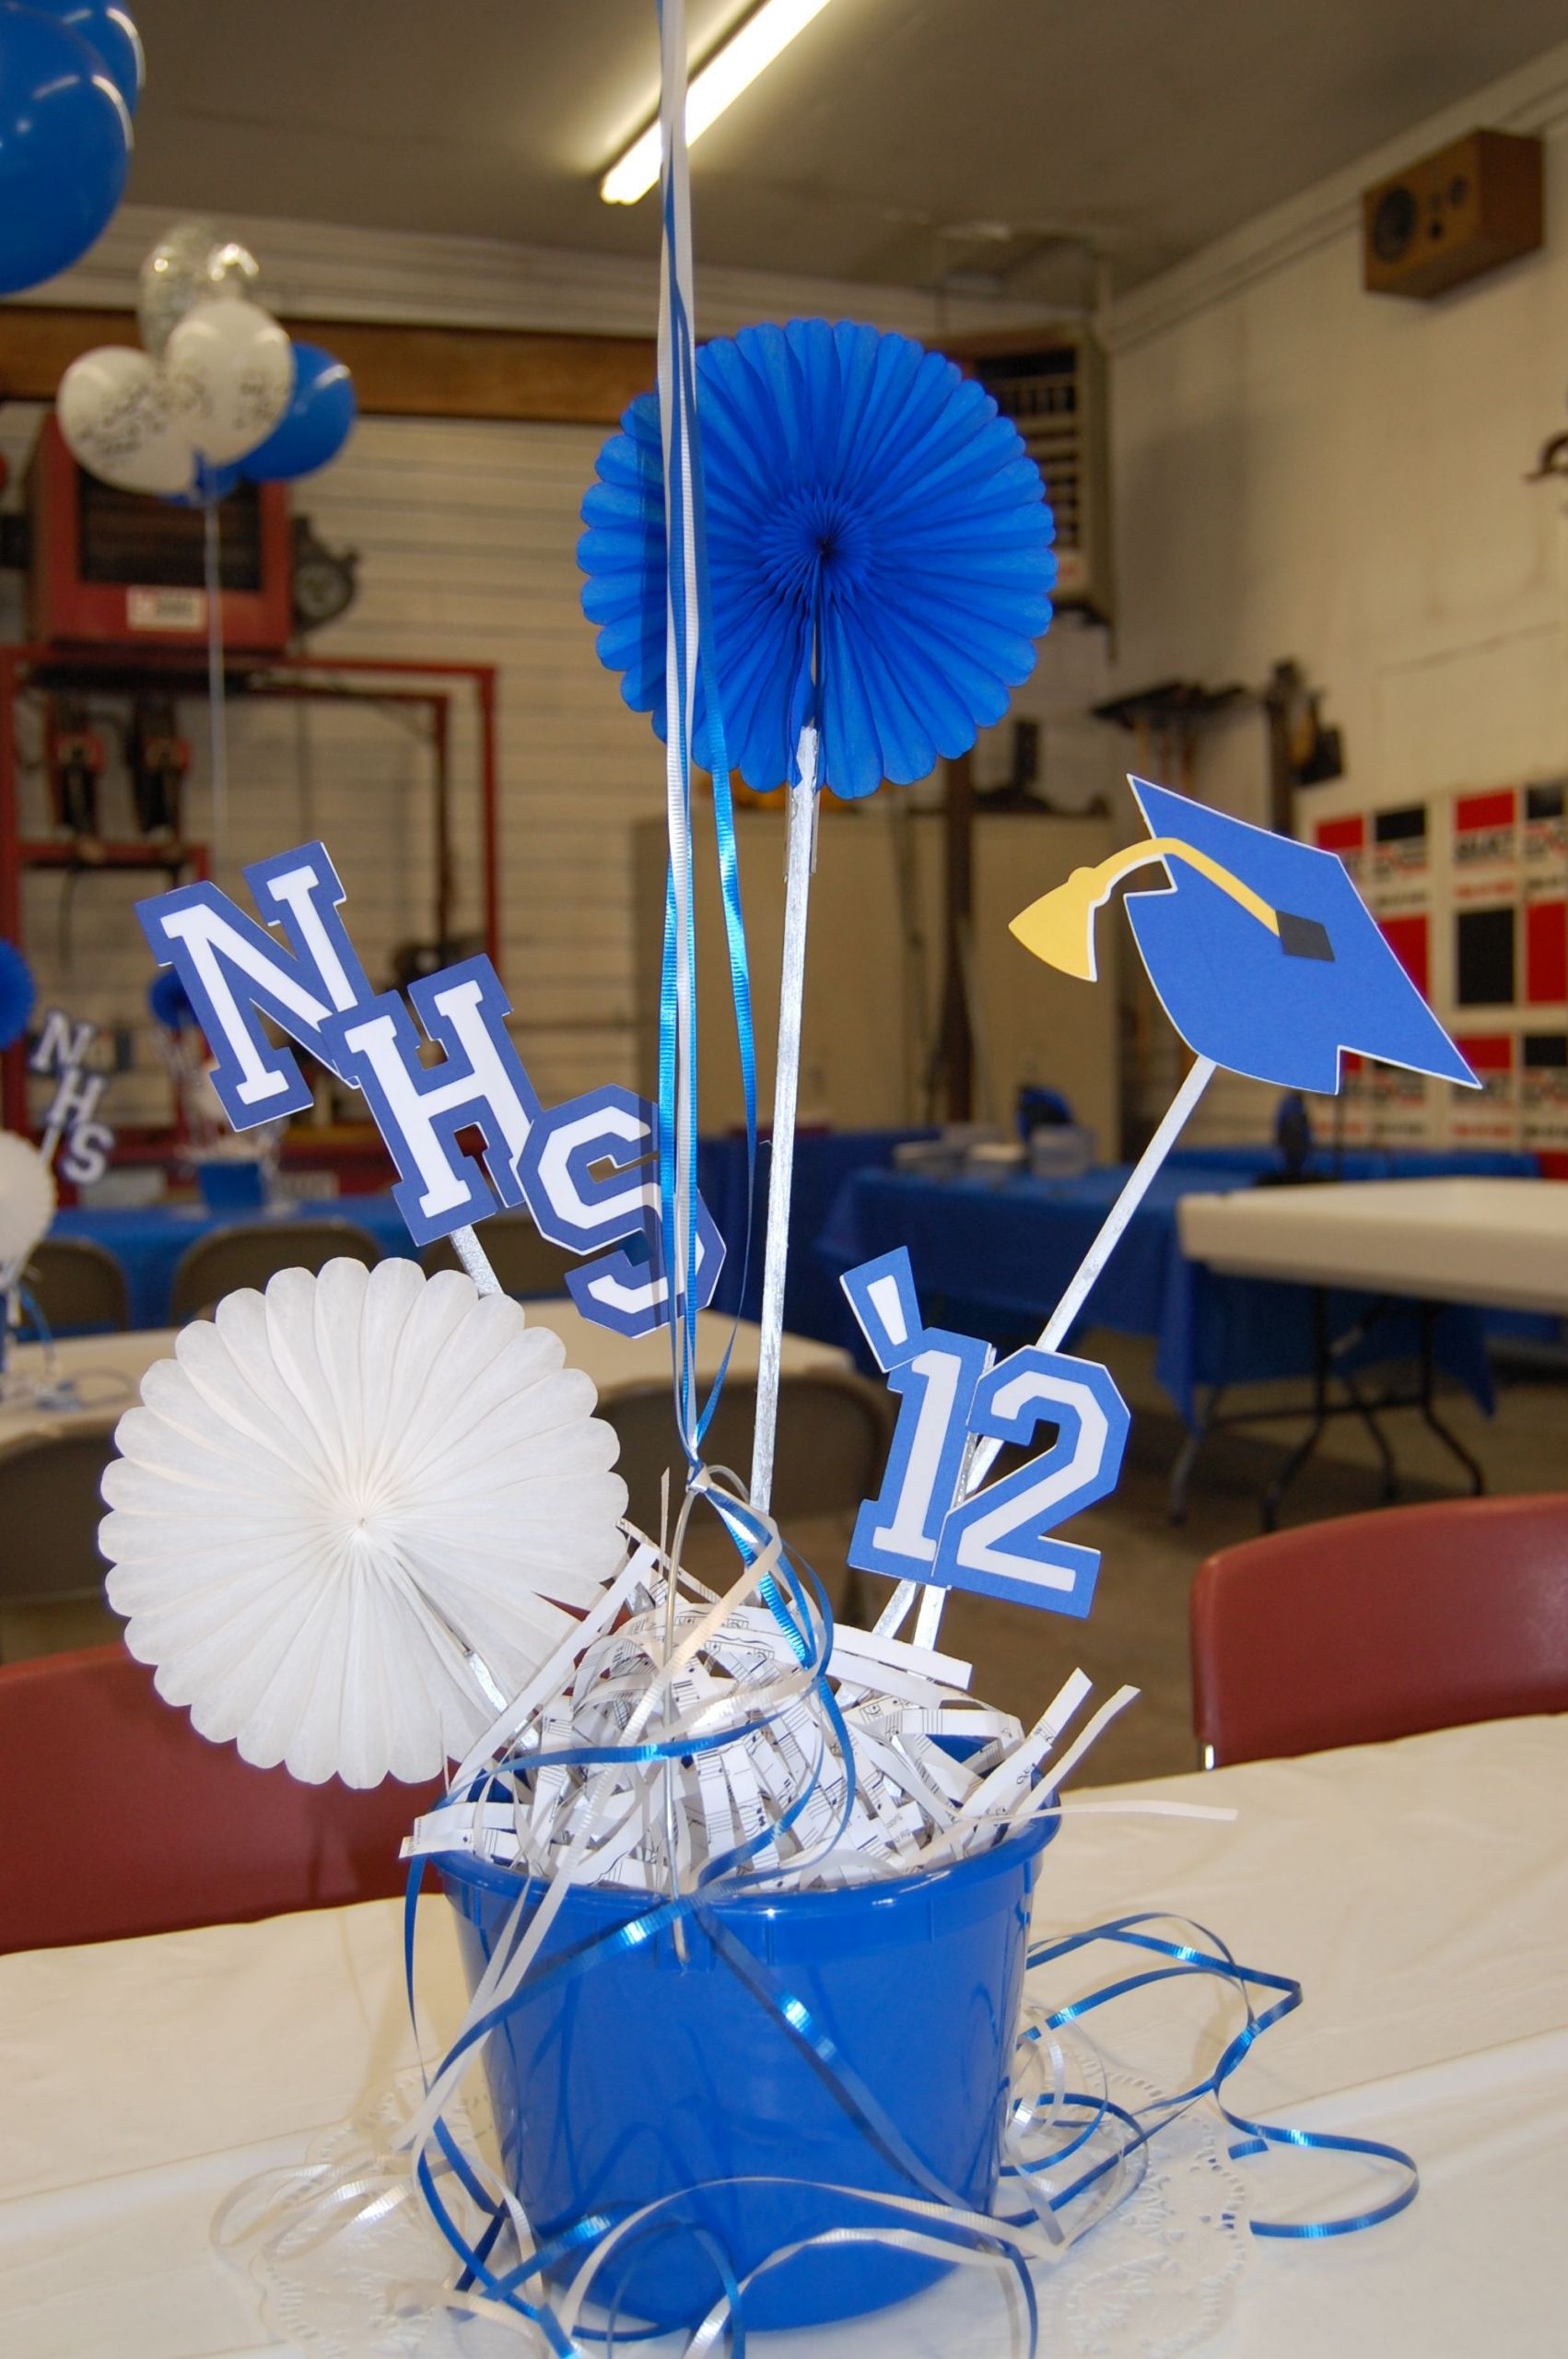 Centerpiece Graduation Party Ideas
 Easy centerpieces Grad time will be here soon